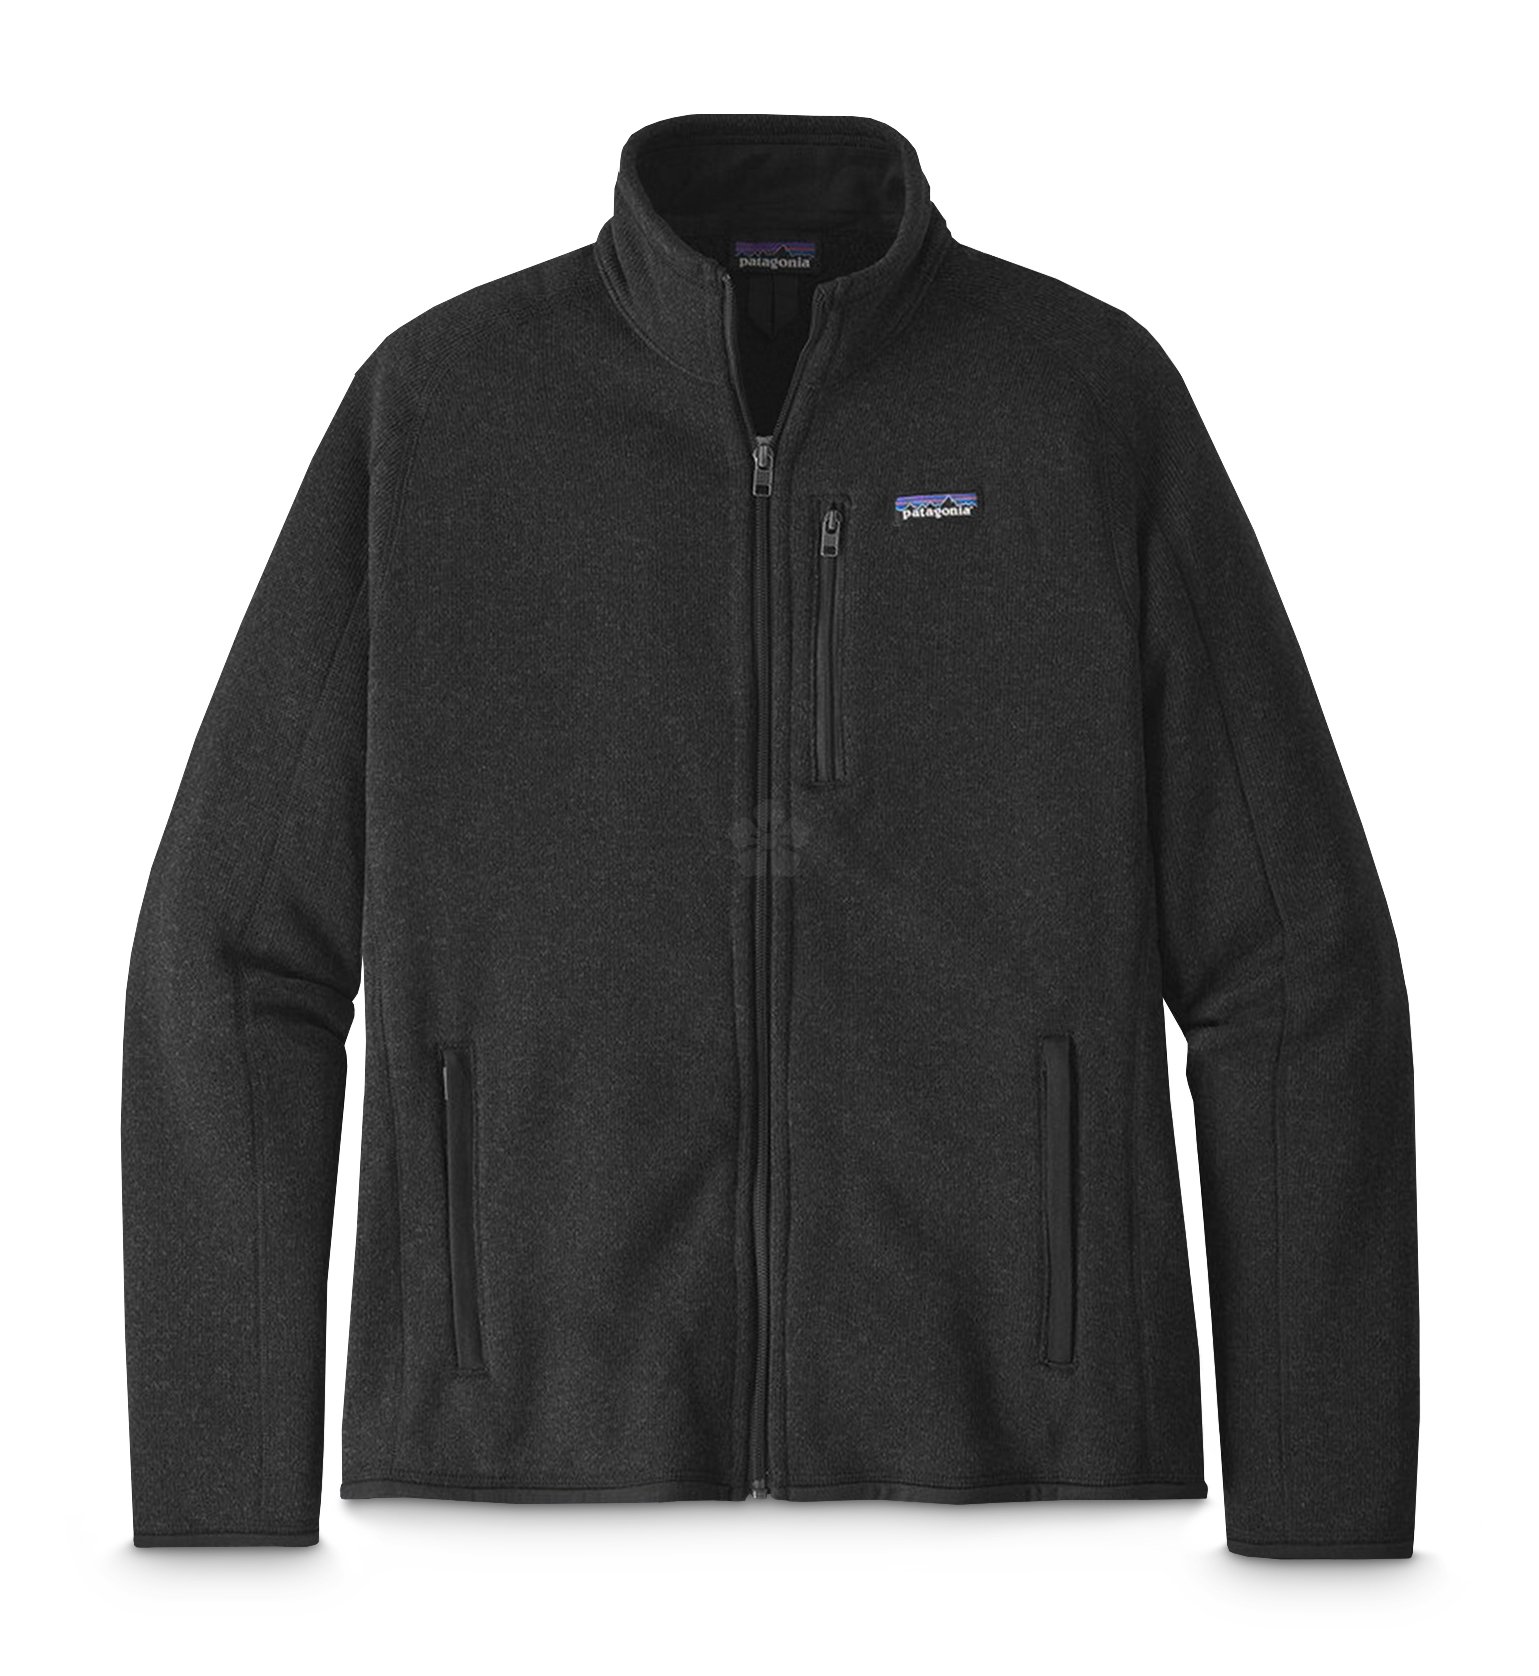 Promotional Patagonia Better Sweater Jacket, Personalised by MoJo ...